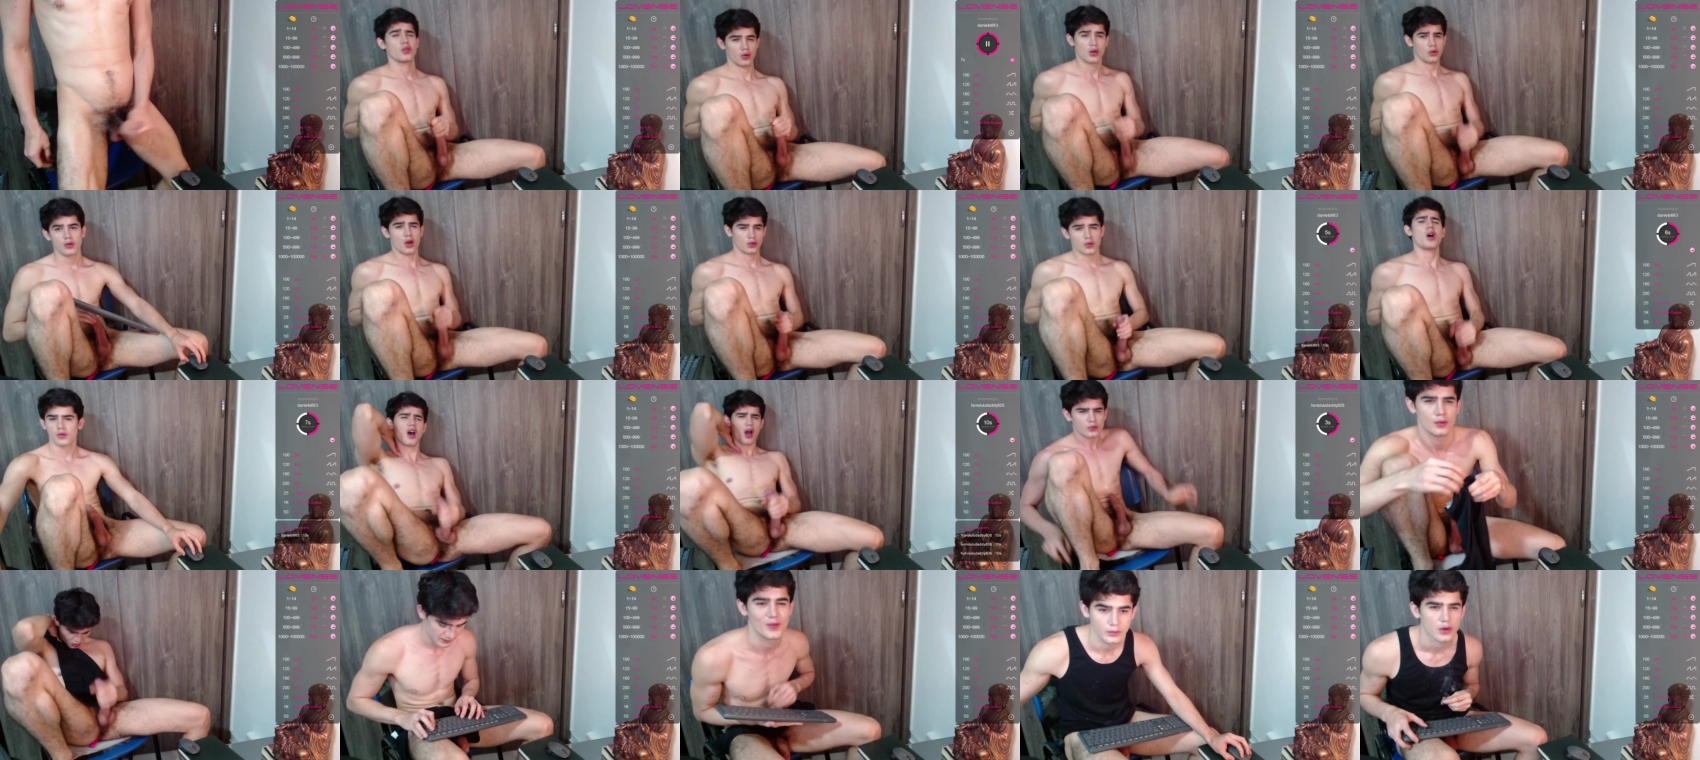 connor_wesley1 Nude CAM SHOW @ Chaturbate 18-04-2022